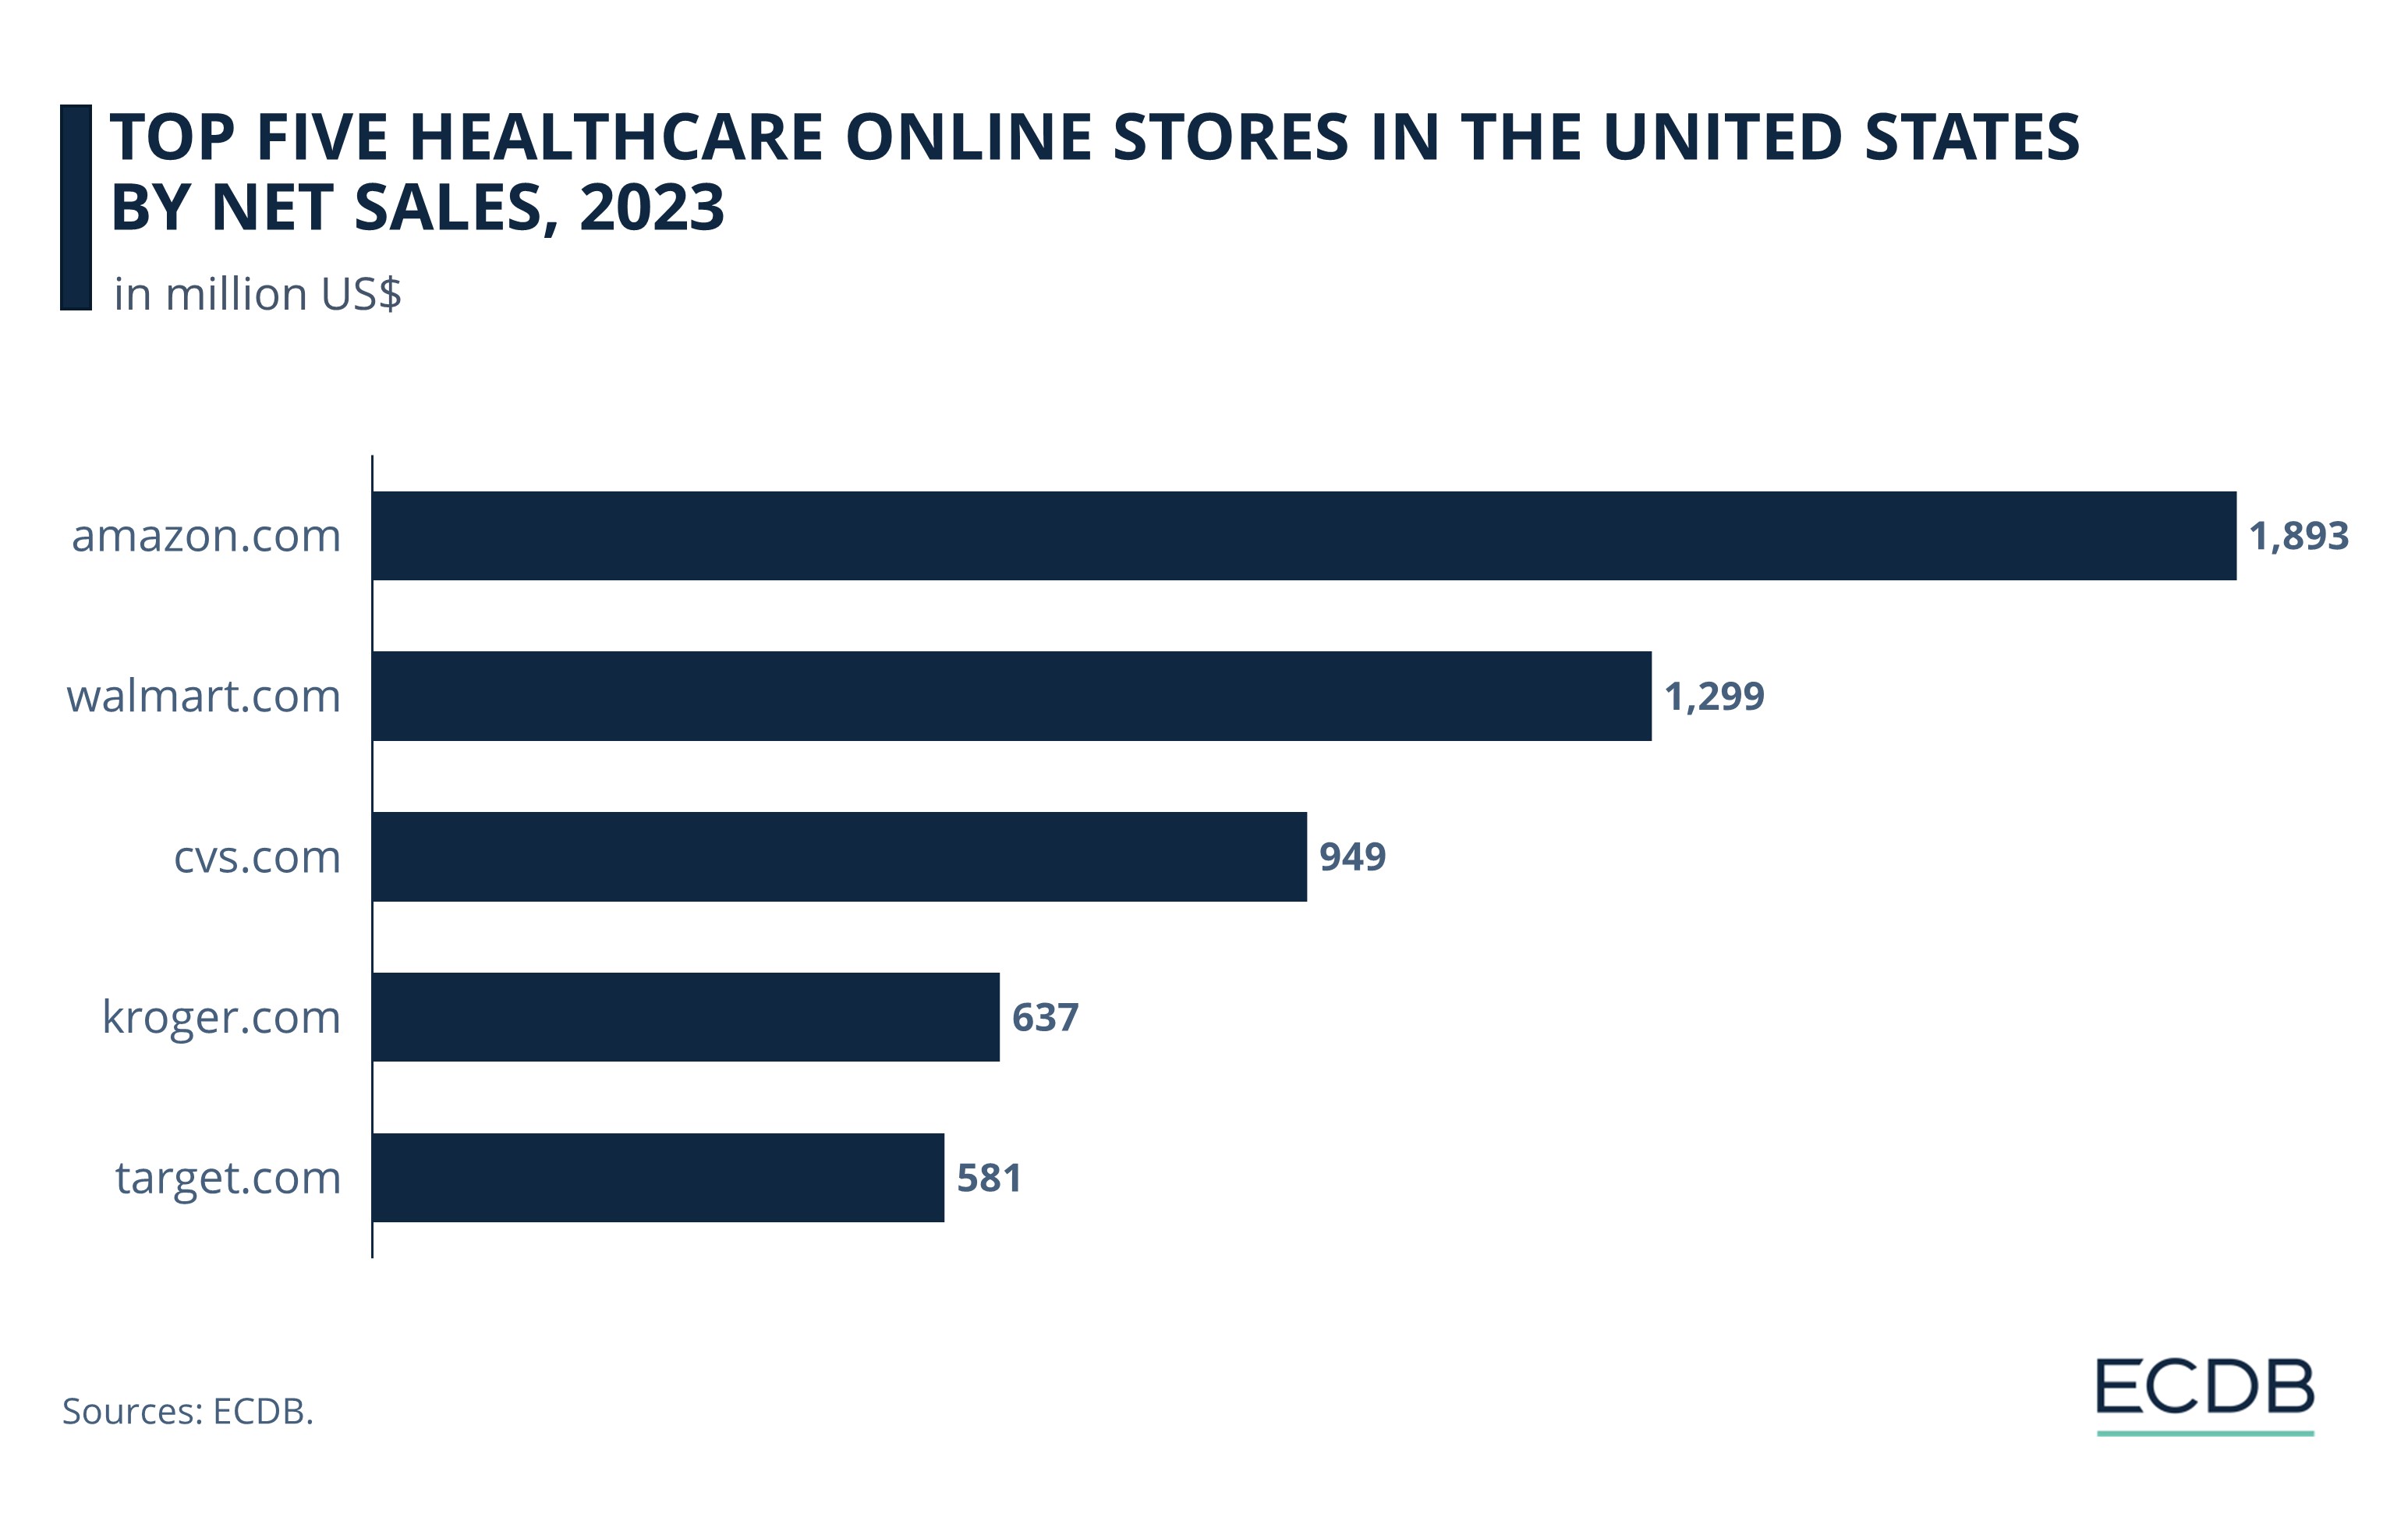 Top Five Healthcare Online Stores in the United States by Net Sales, 2023